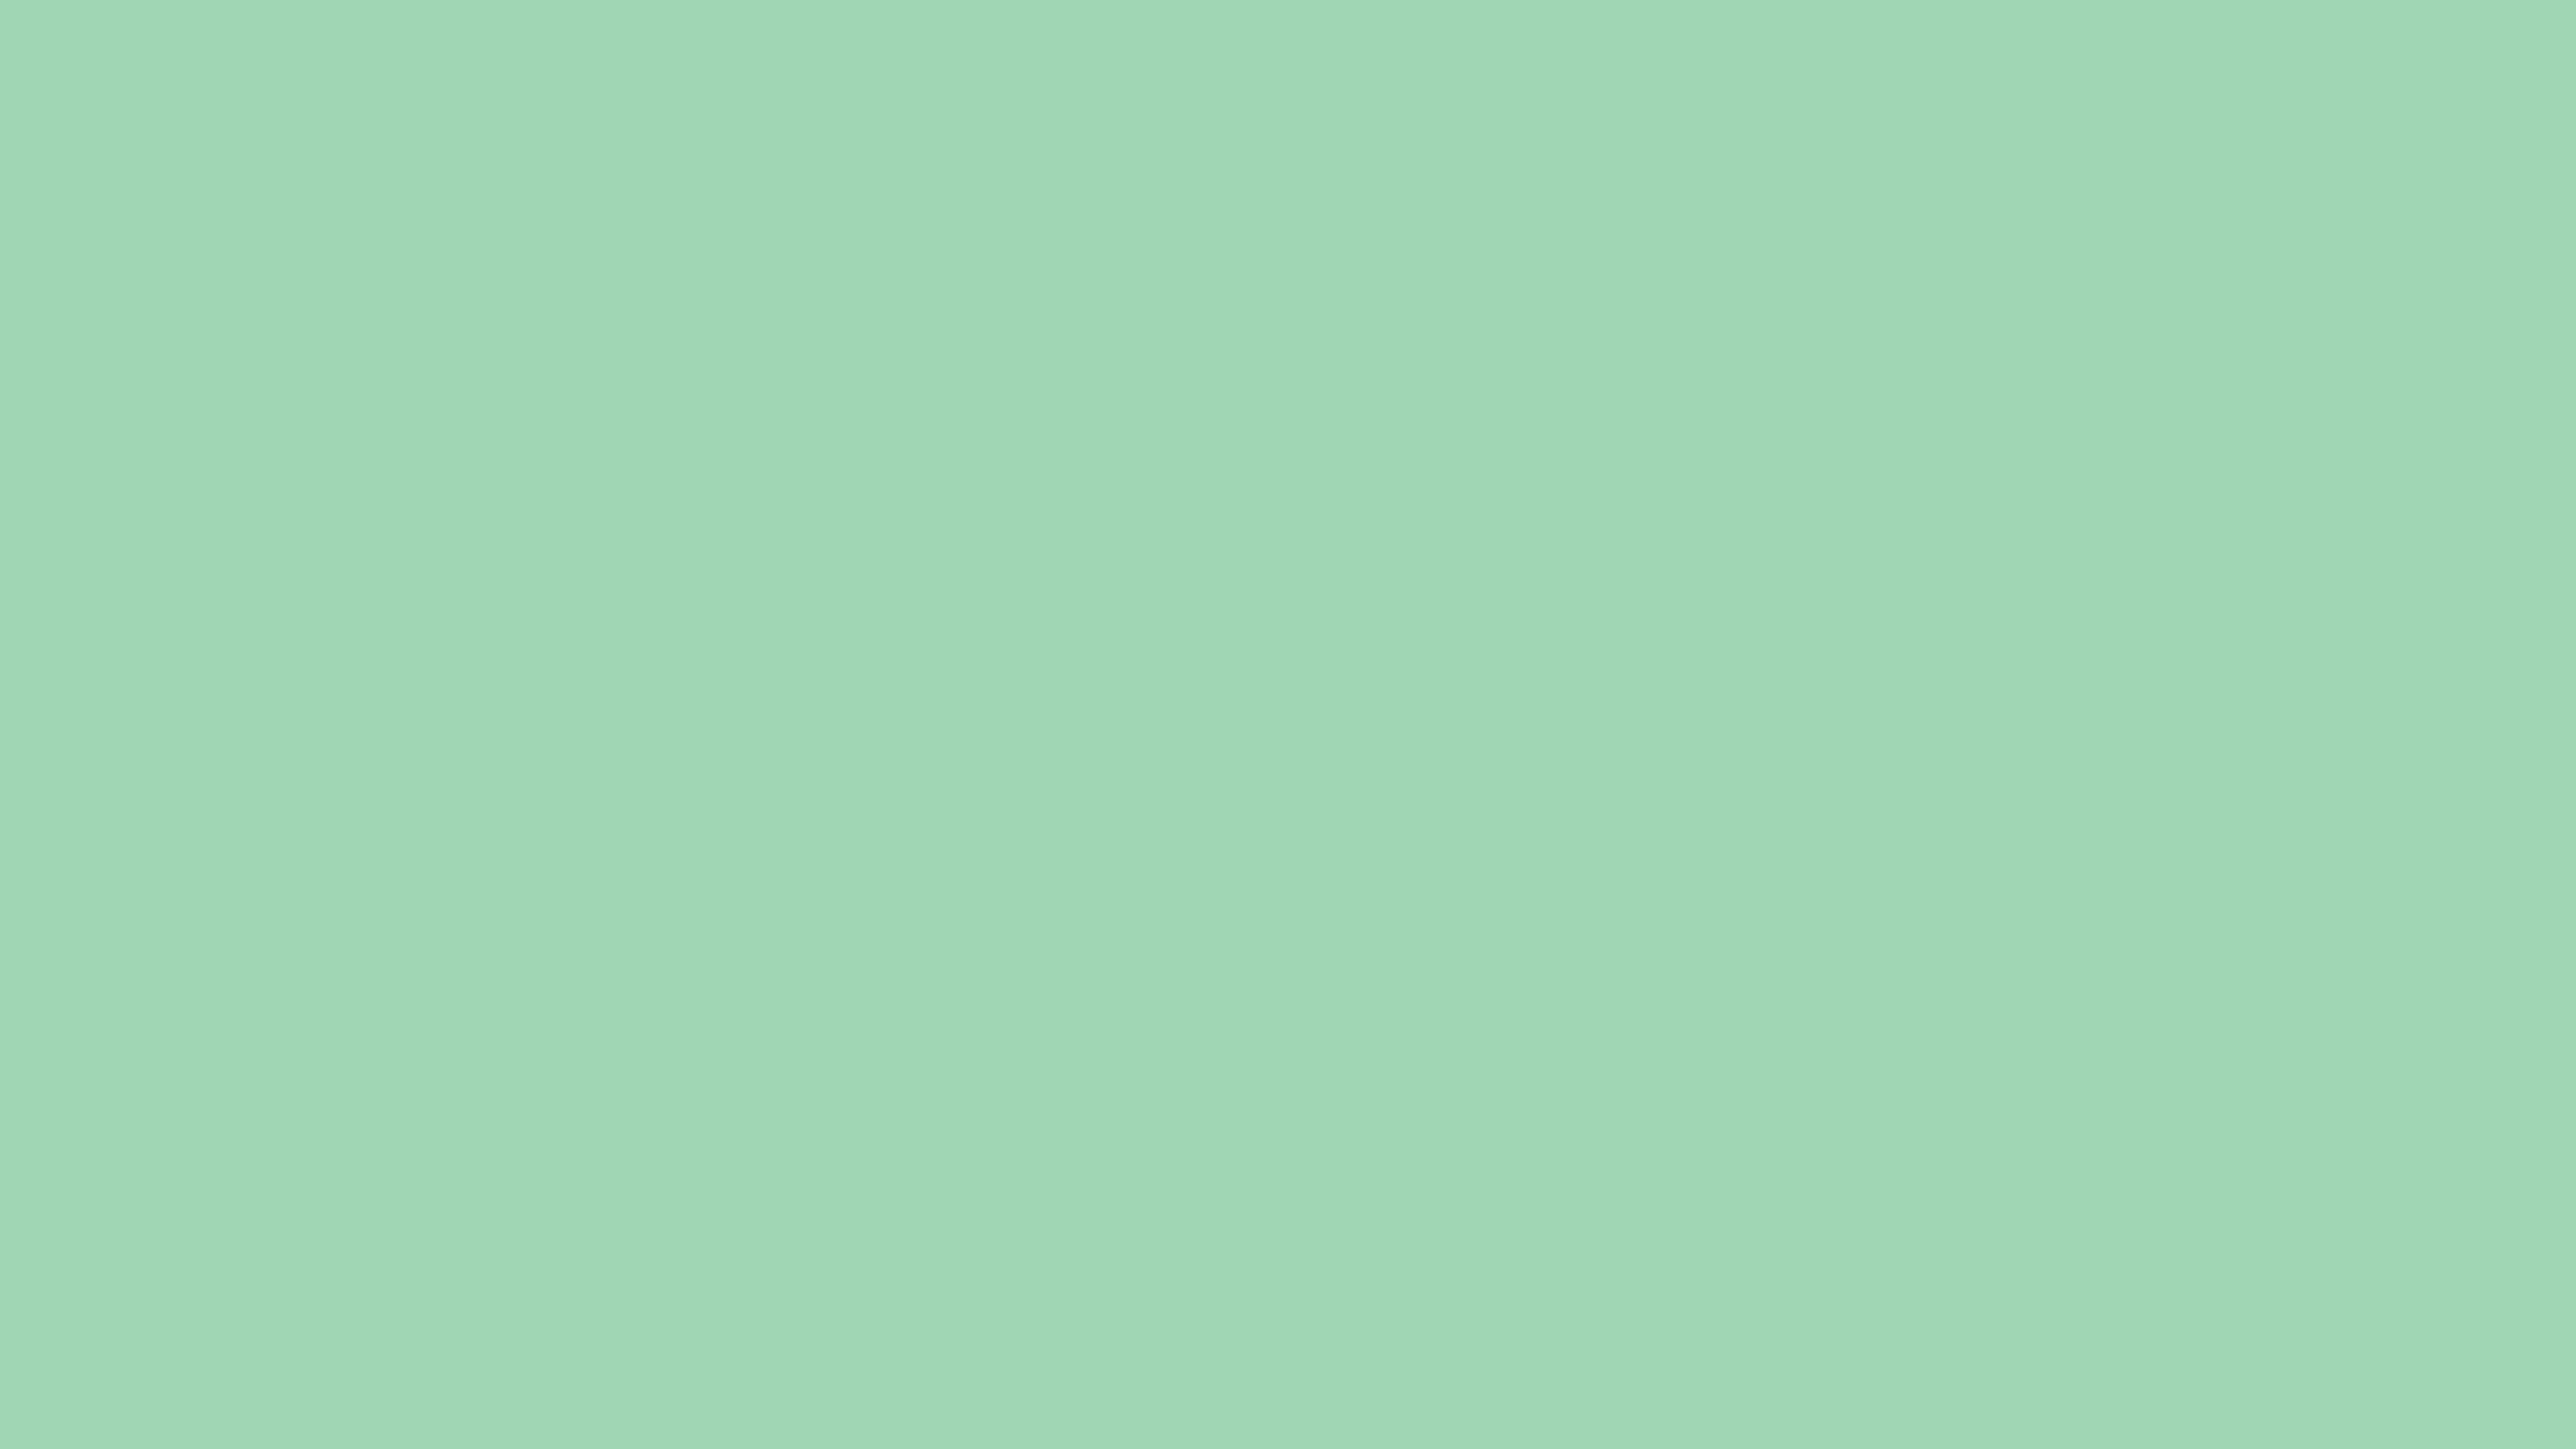 7680x4320 Turquoise Green Solid Color Background